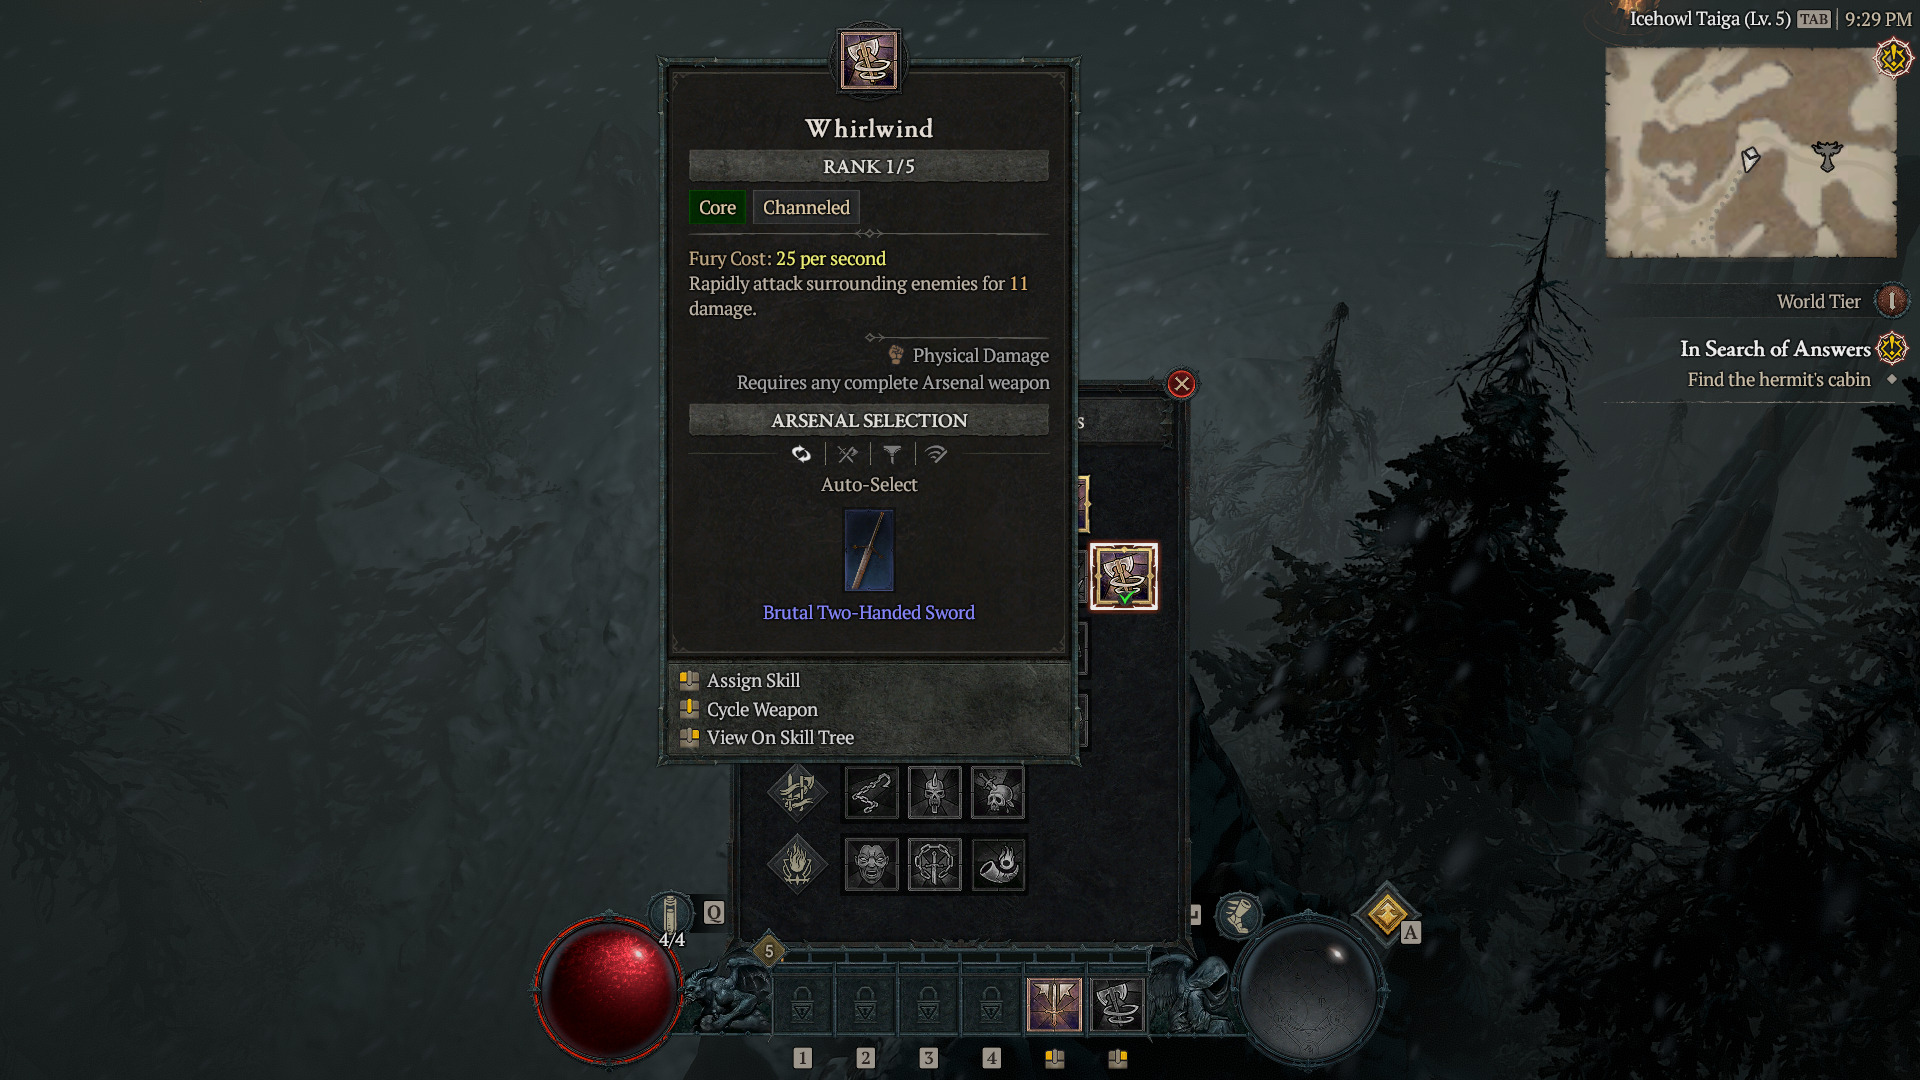 Switch weapons in Diablo IV through the Skill Assignment Flyout menu. 